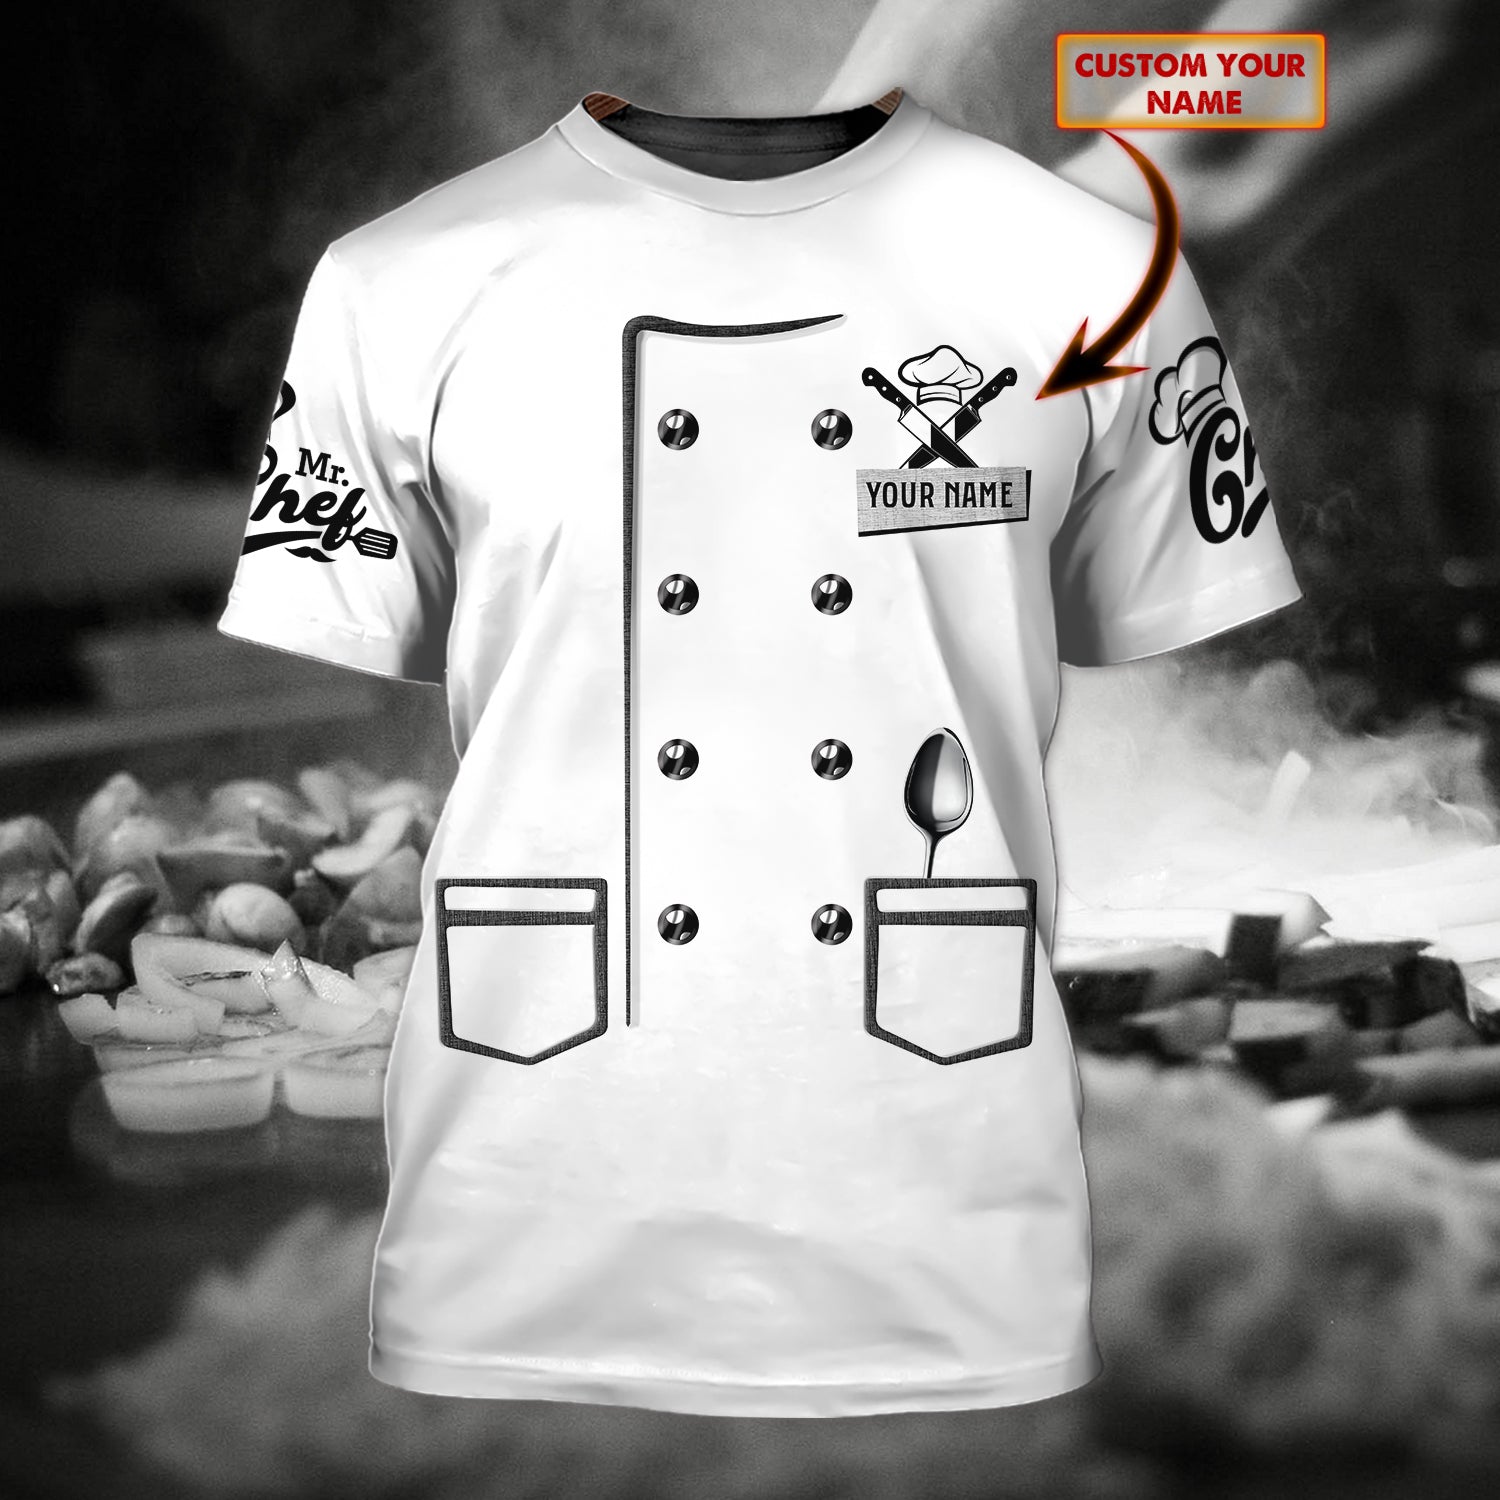 Chef 05 - Personalized Name 3D T Shirt - 16hb